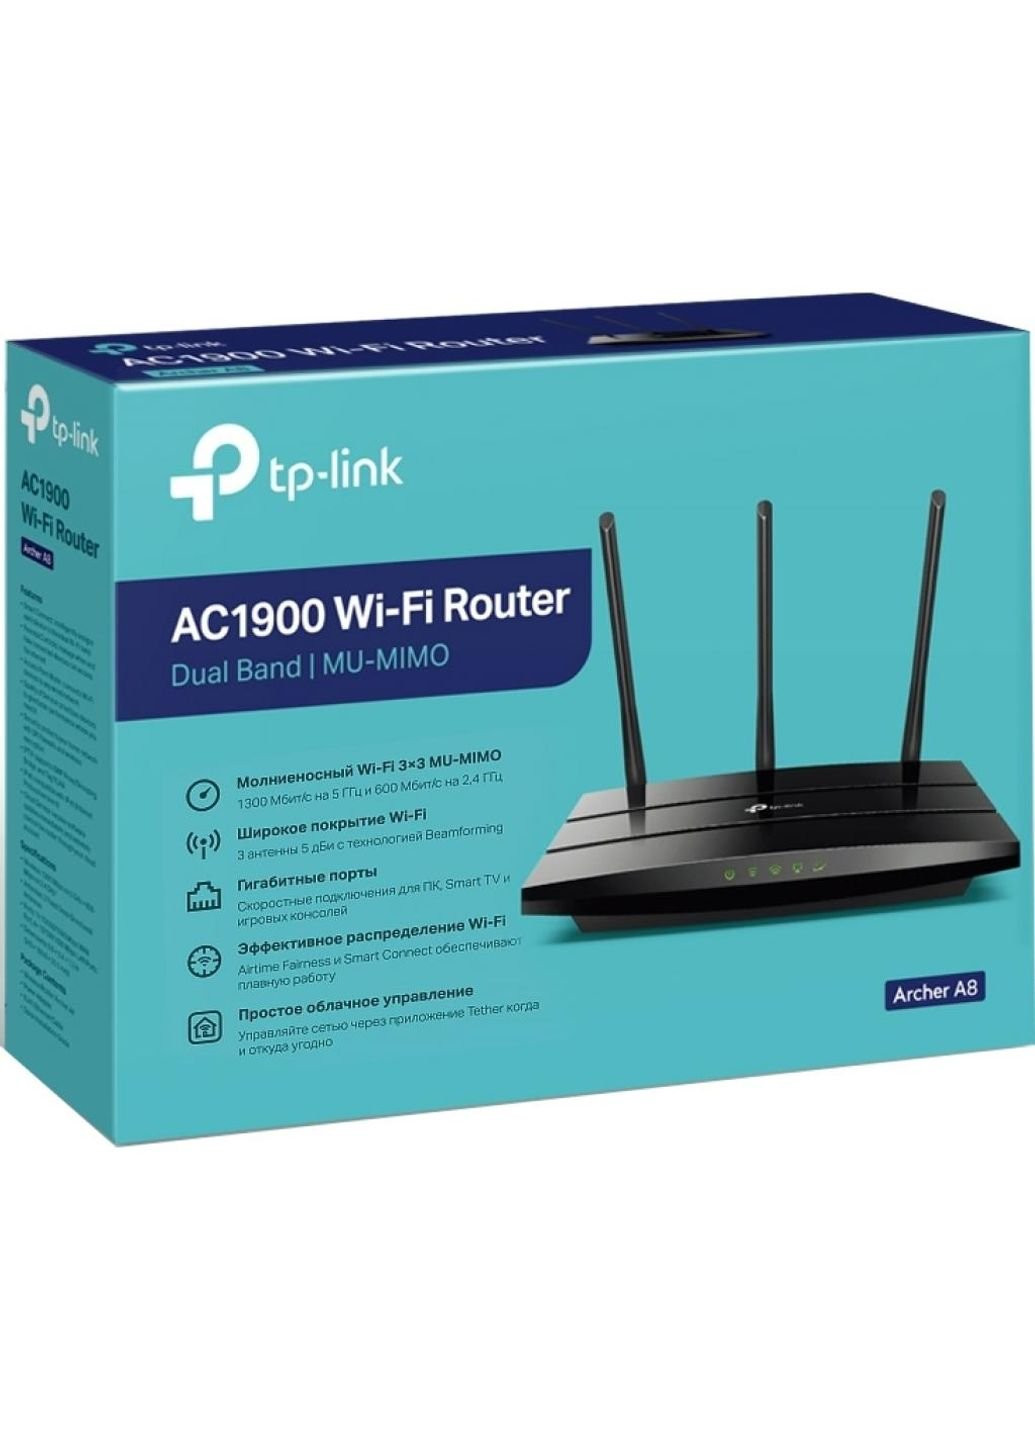 Маршрутизатор ARCHER-A8 TP-Link (250095387)